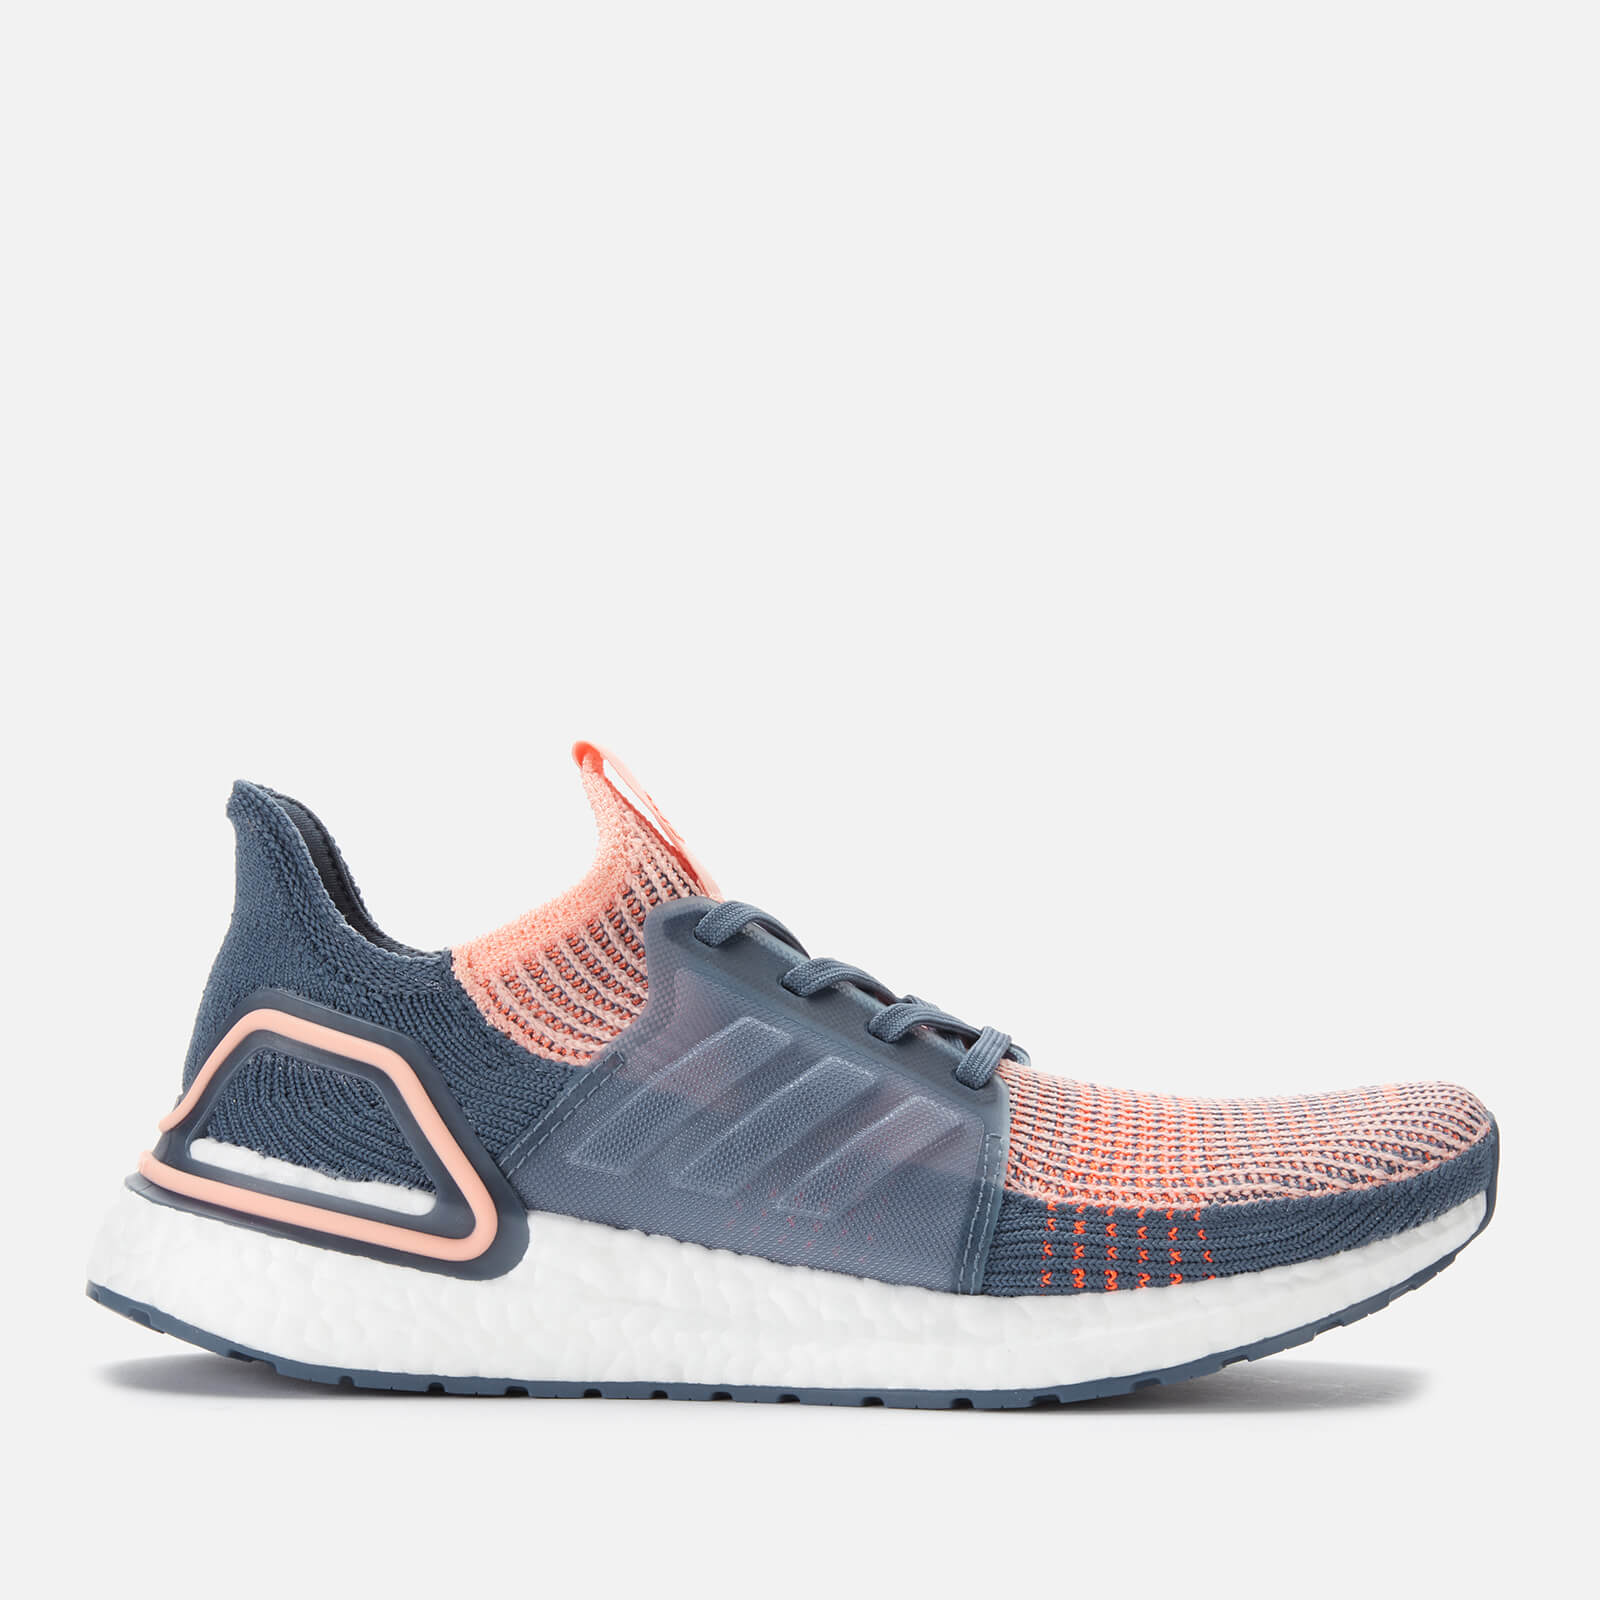 blue and pink ultra boost